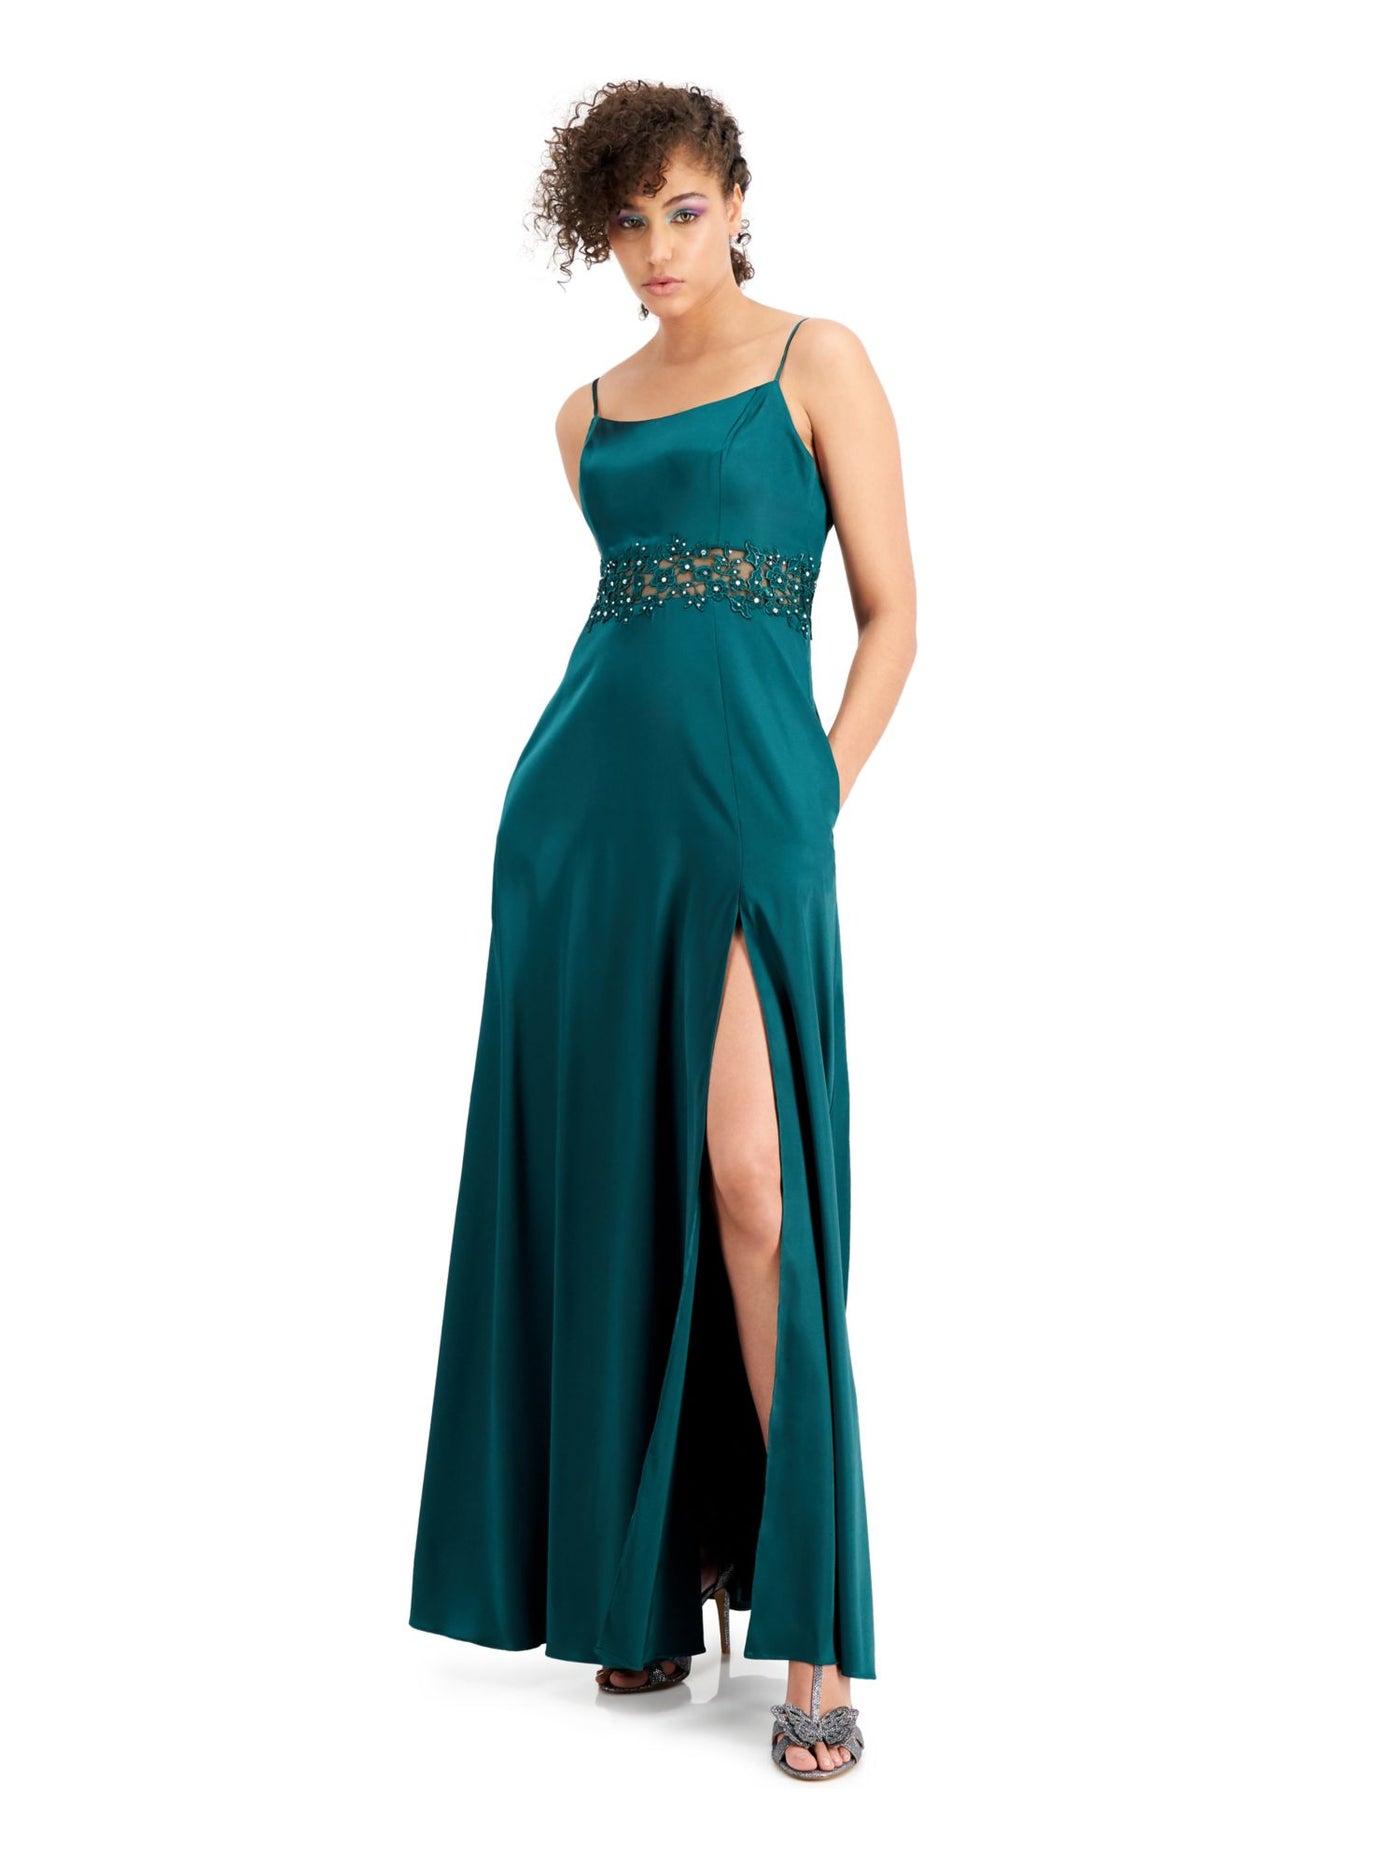 CITY STUDIO Womens Green Embellished Zippered Satin Gown Spaghetti Strap Scoop Neck Maxi Prom Dress Juniors 0